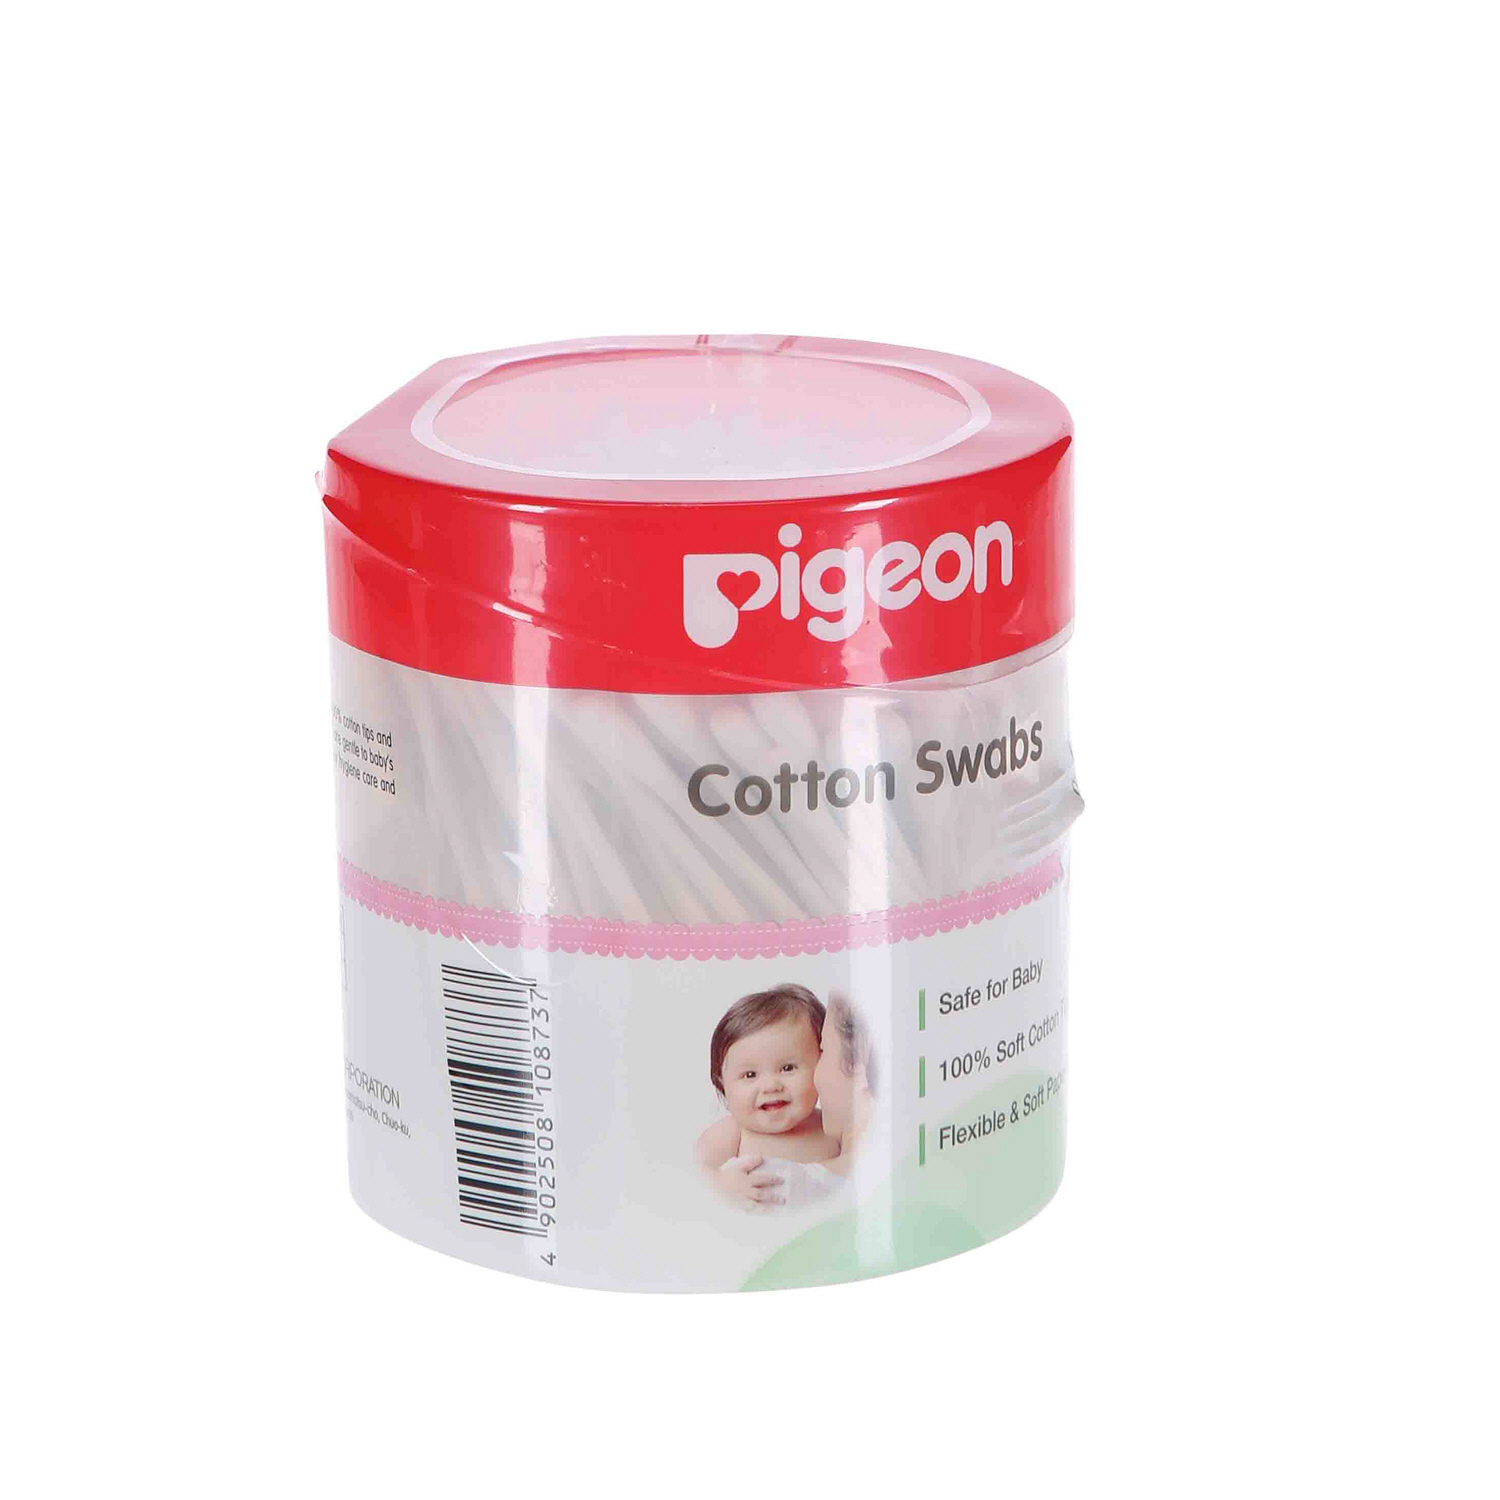 Pigeon Cotton Swabs Hinged Case 200 Pieces